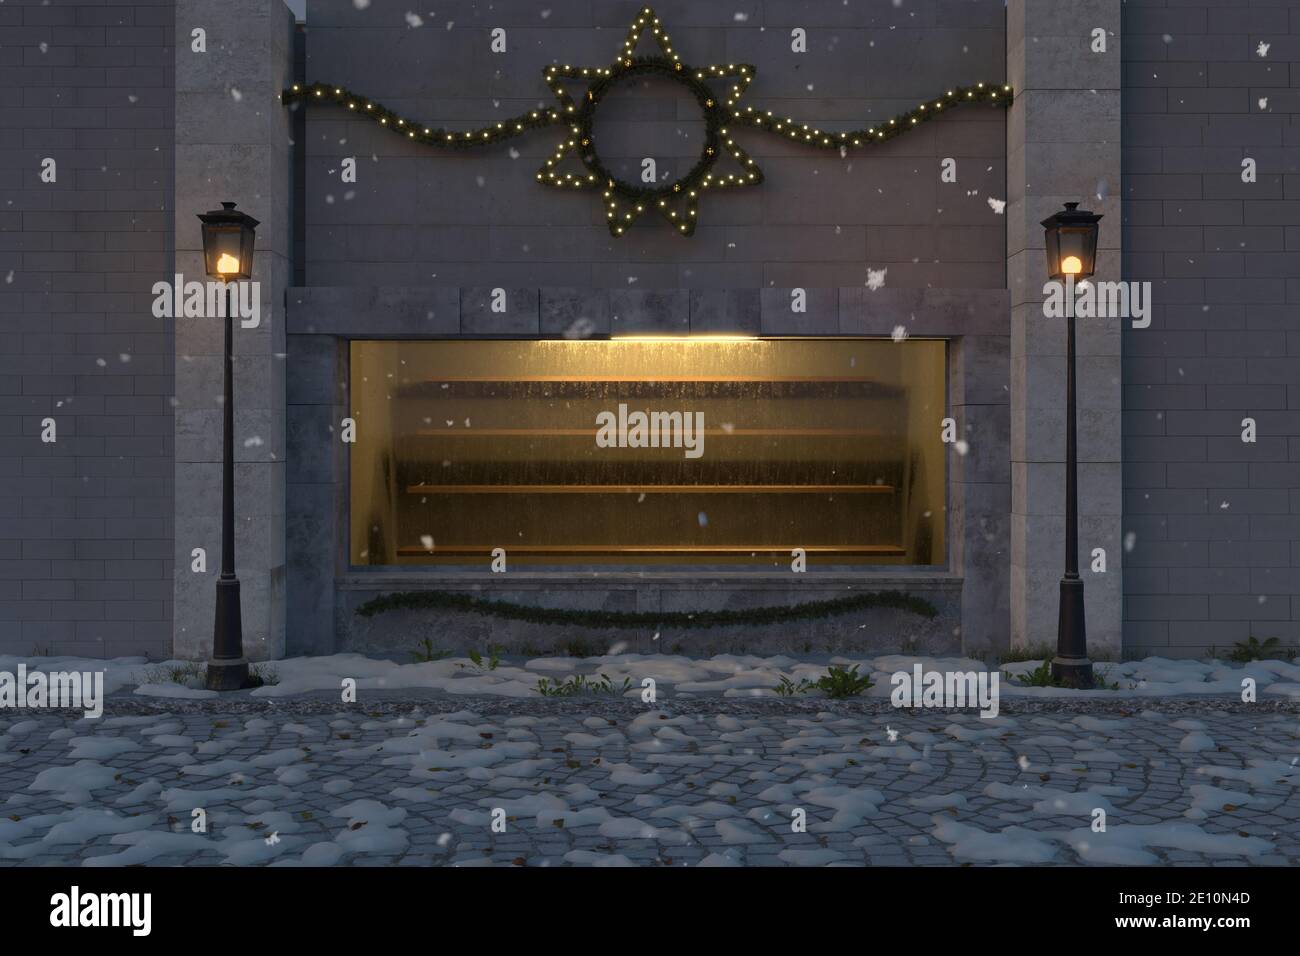 3d rendering of yellow illuminated empty showcase decorated with christmas lighting Stock Photo